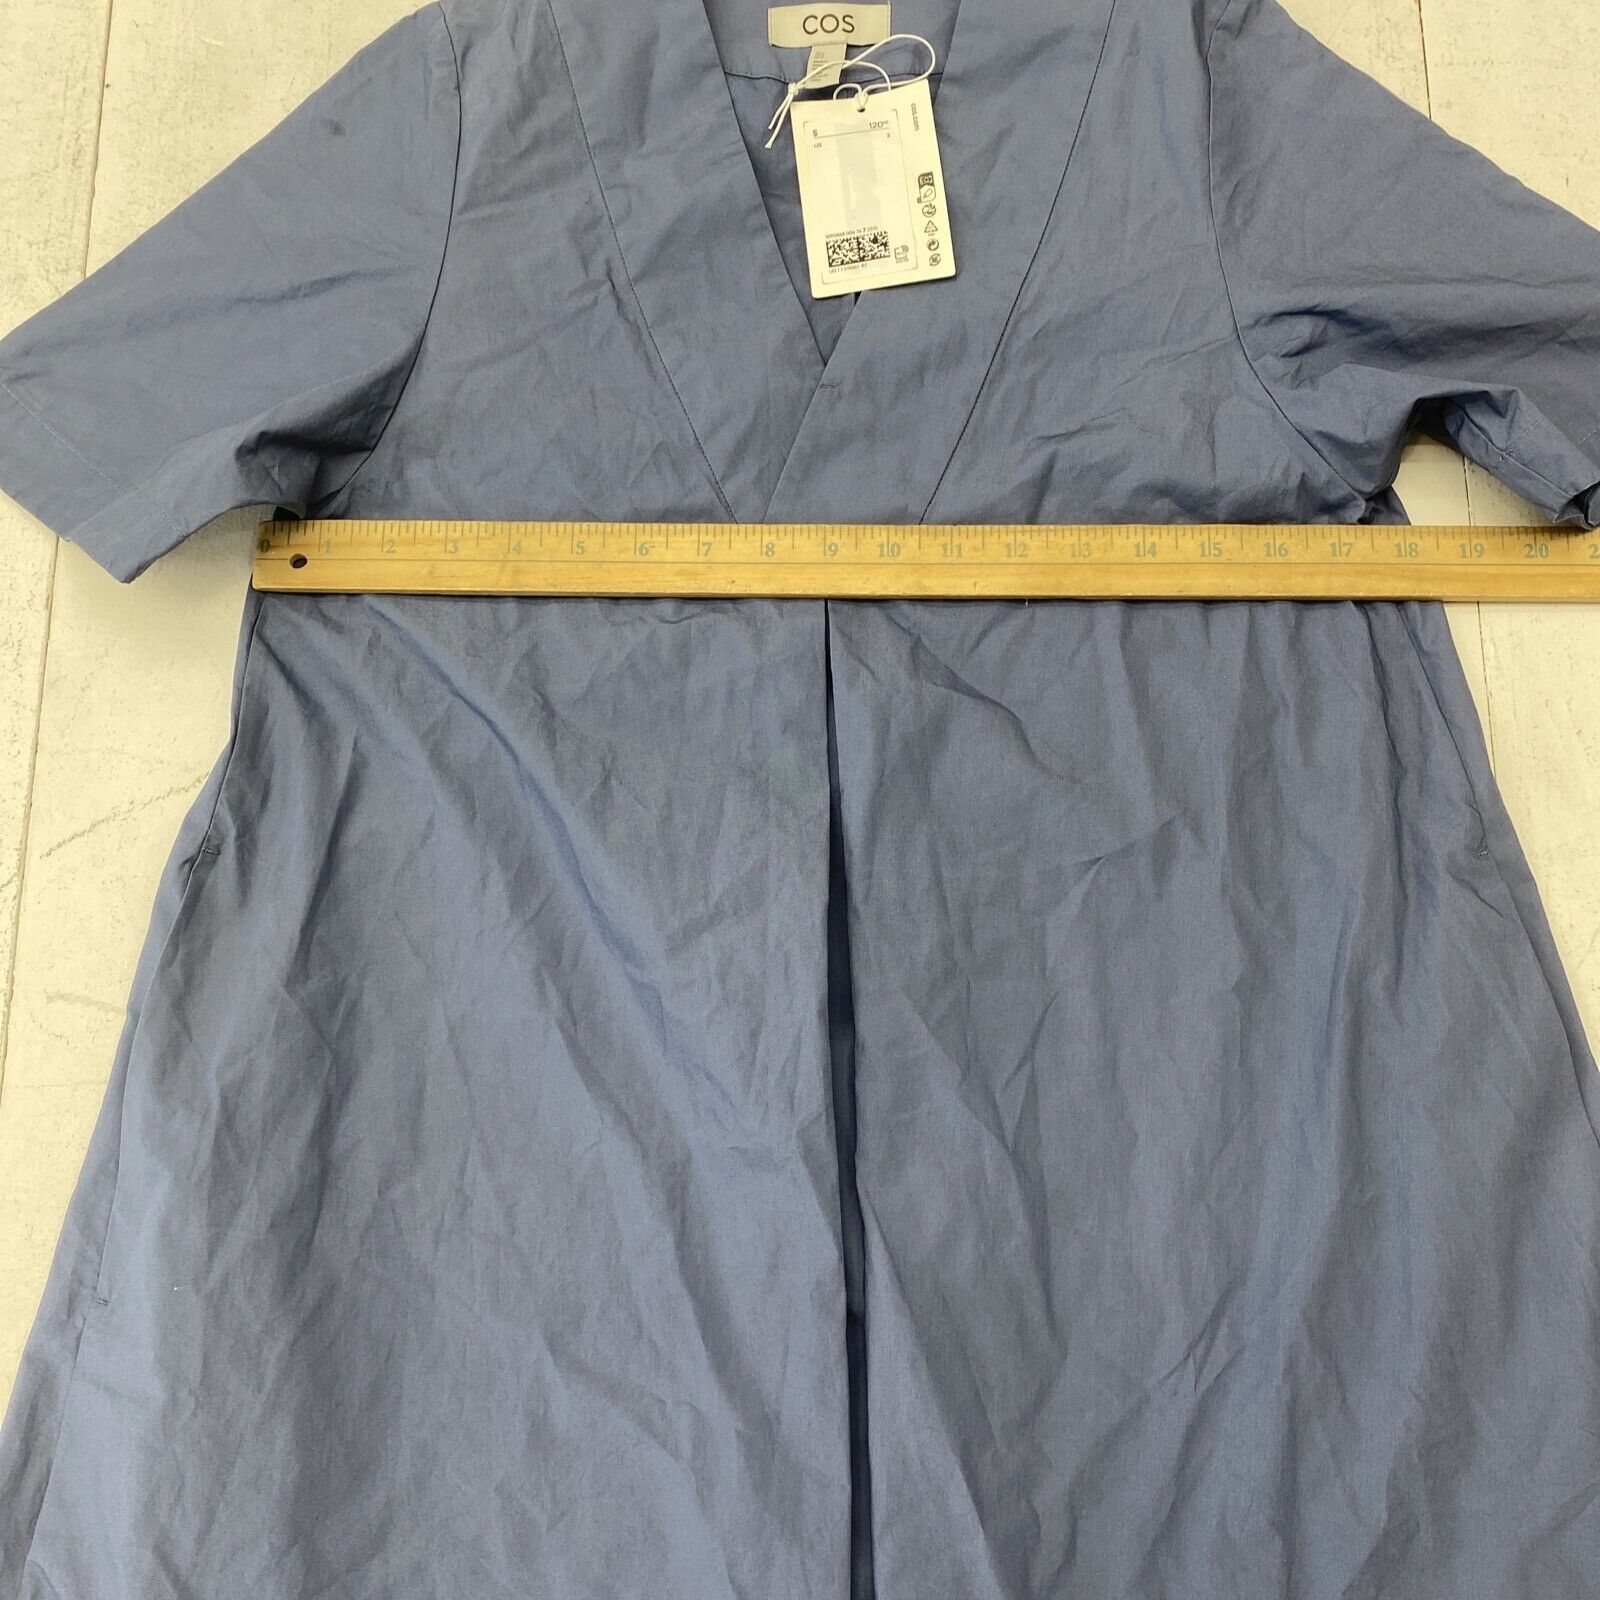 COS Blue Pleated V-Neck Dress With Pockets Women's Size 2 New